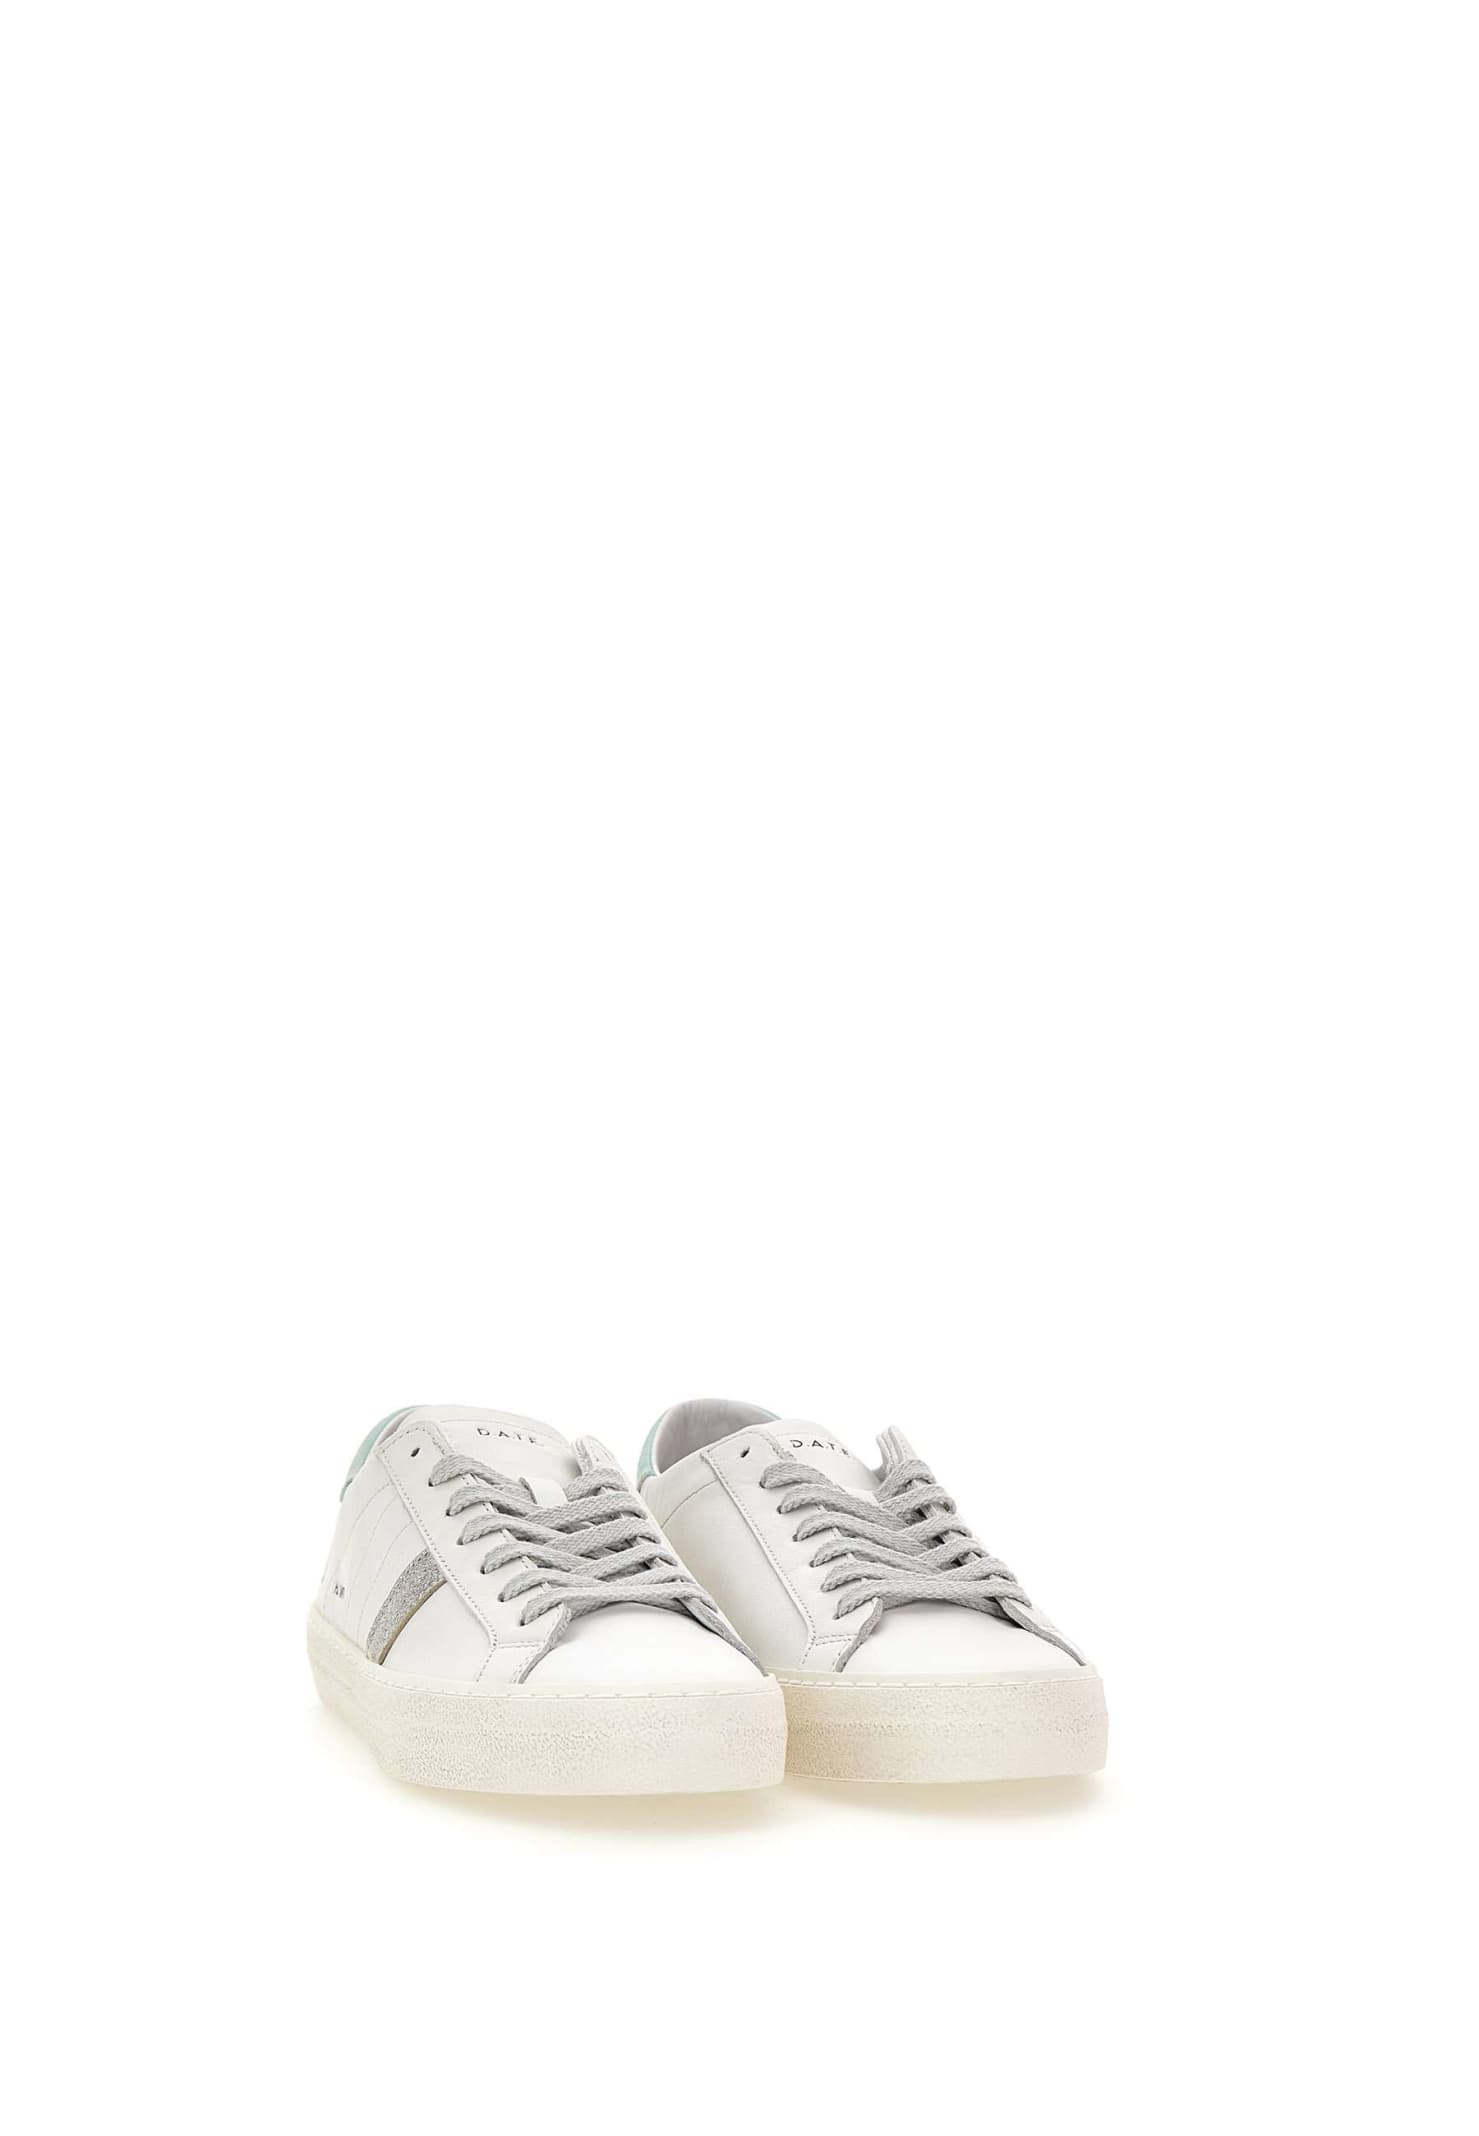 Shop Date Hillow Vintage Sneakers In White